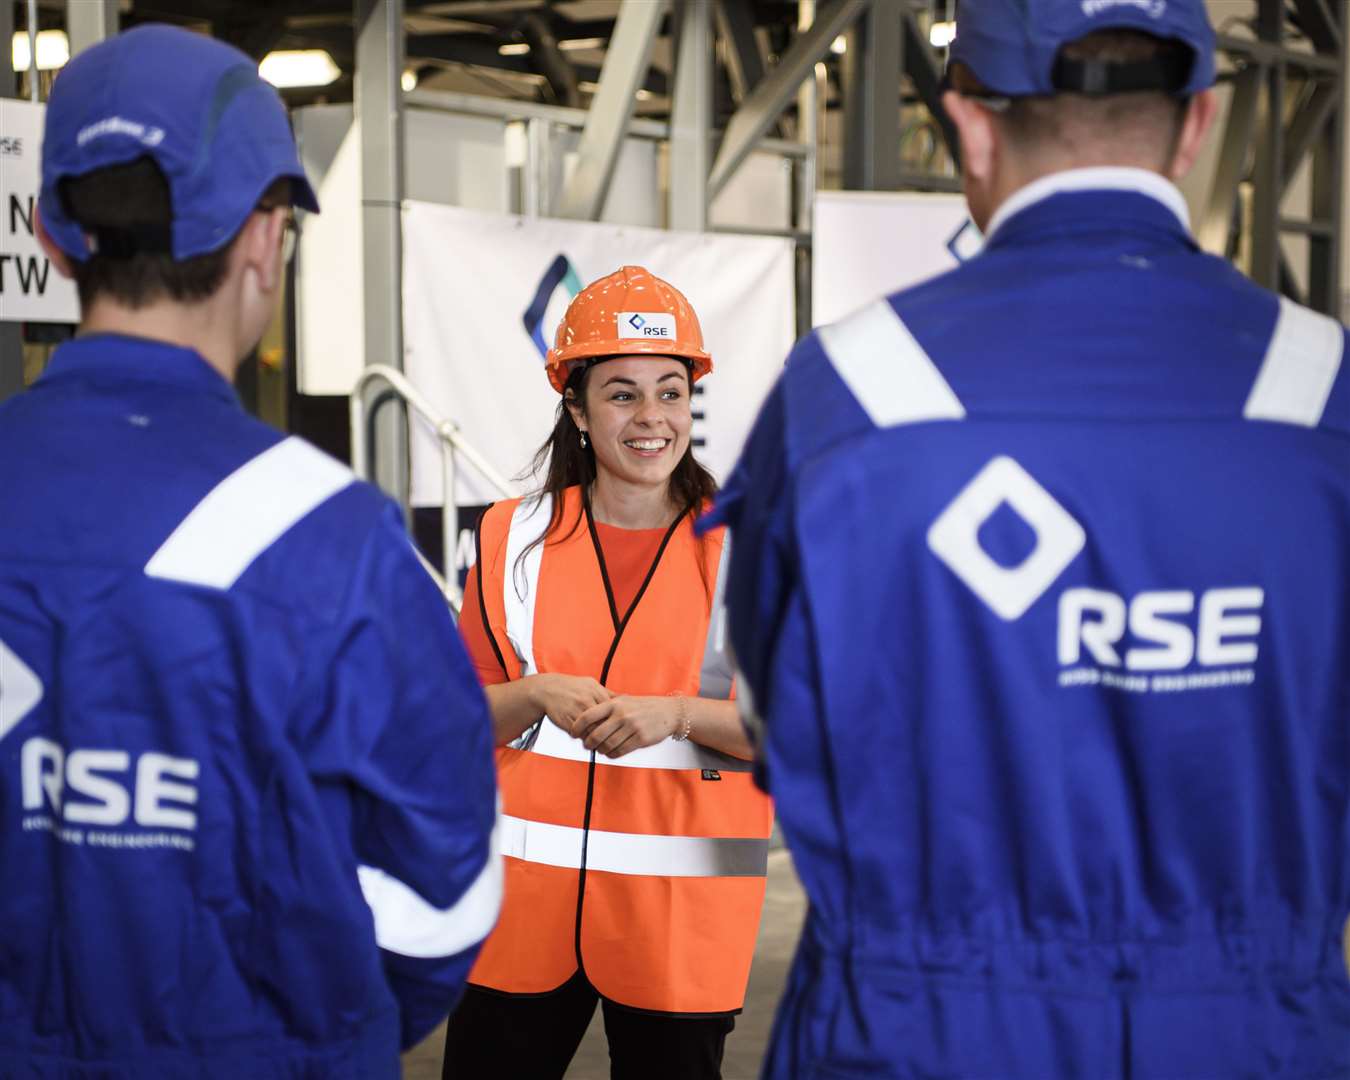 Scottish Government minister Kate Forbes on a visit to RSE in Muir-of-Ord.